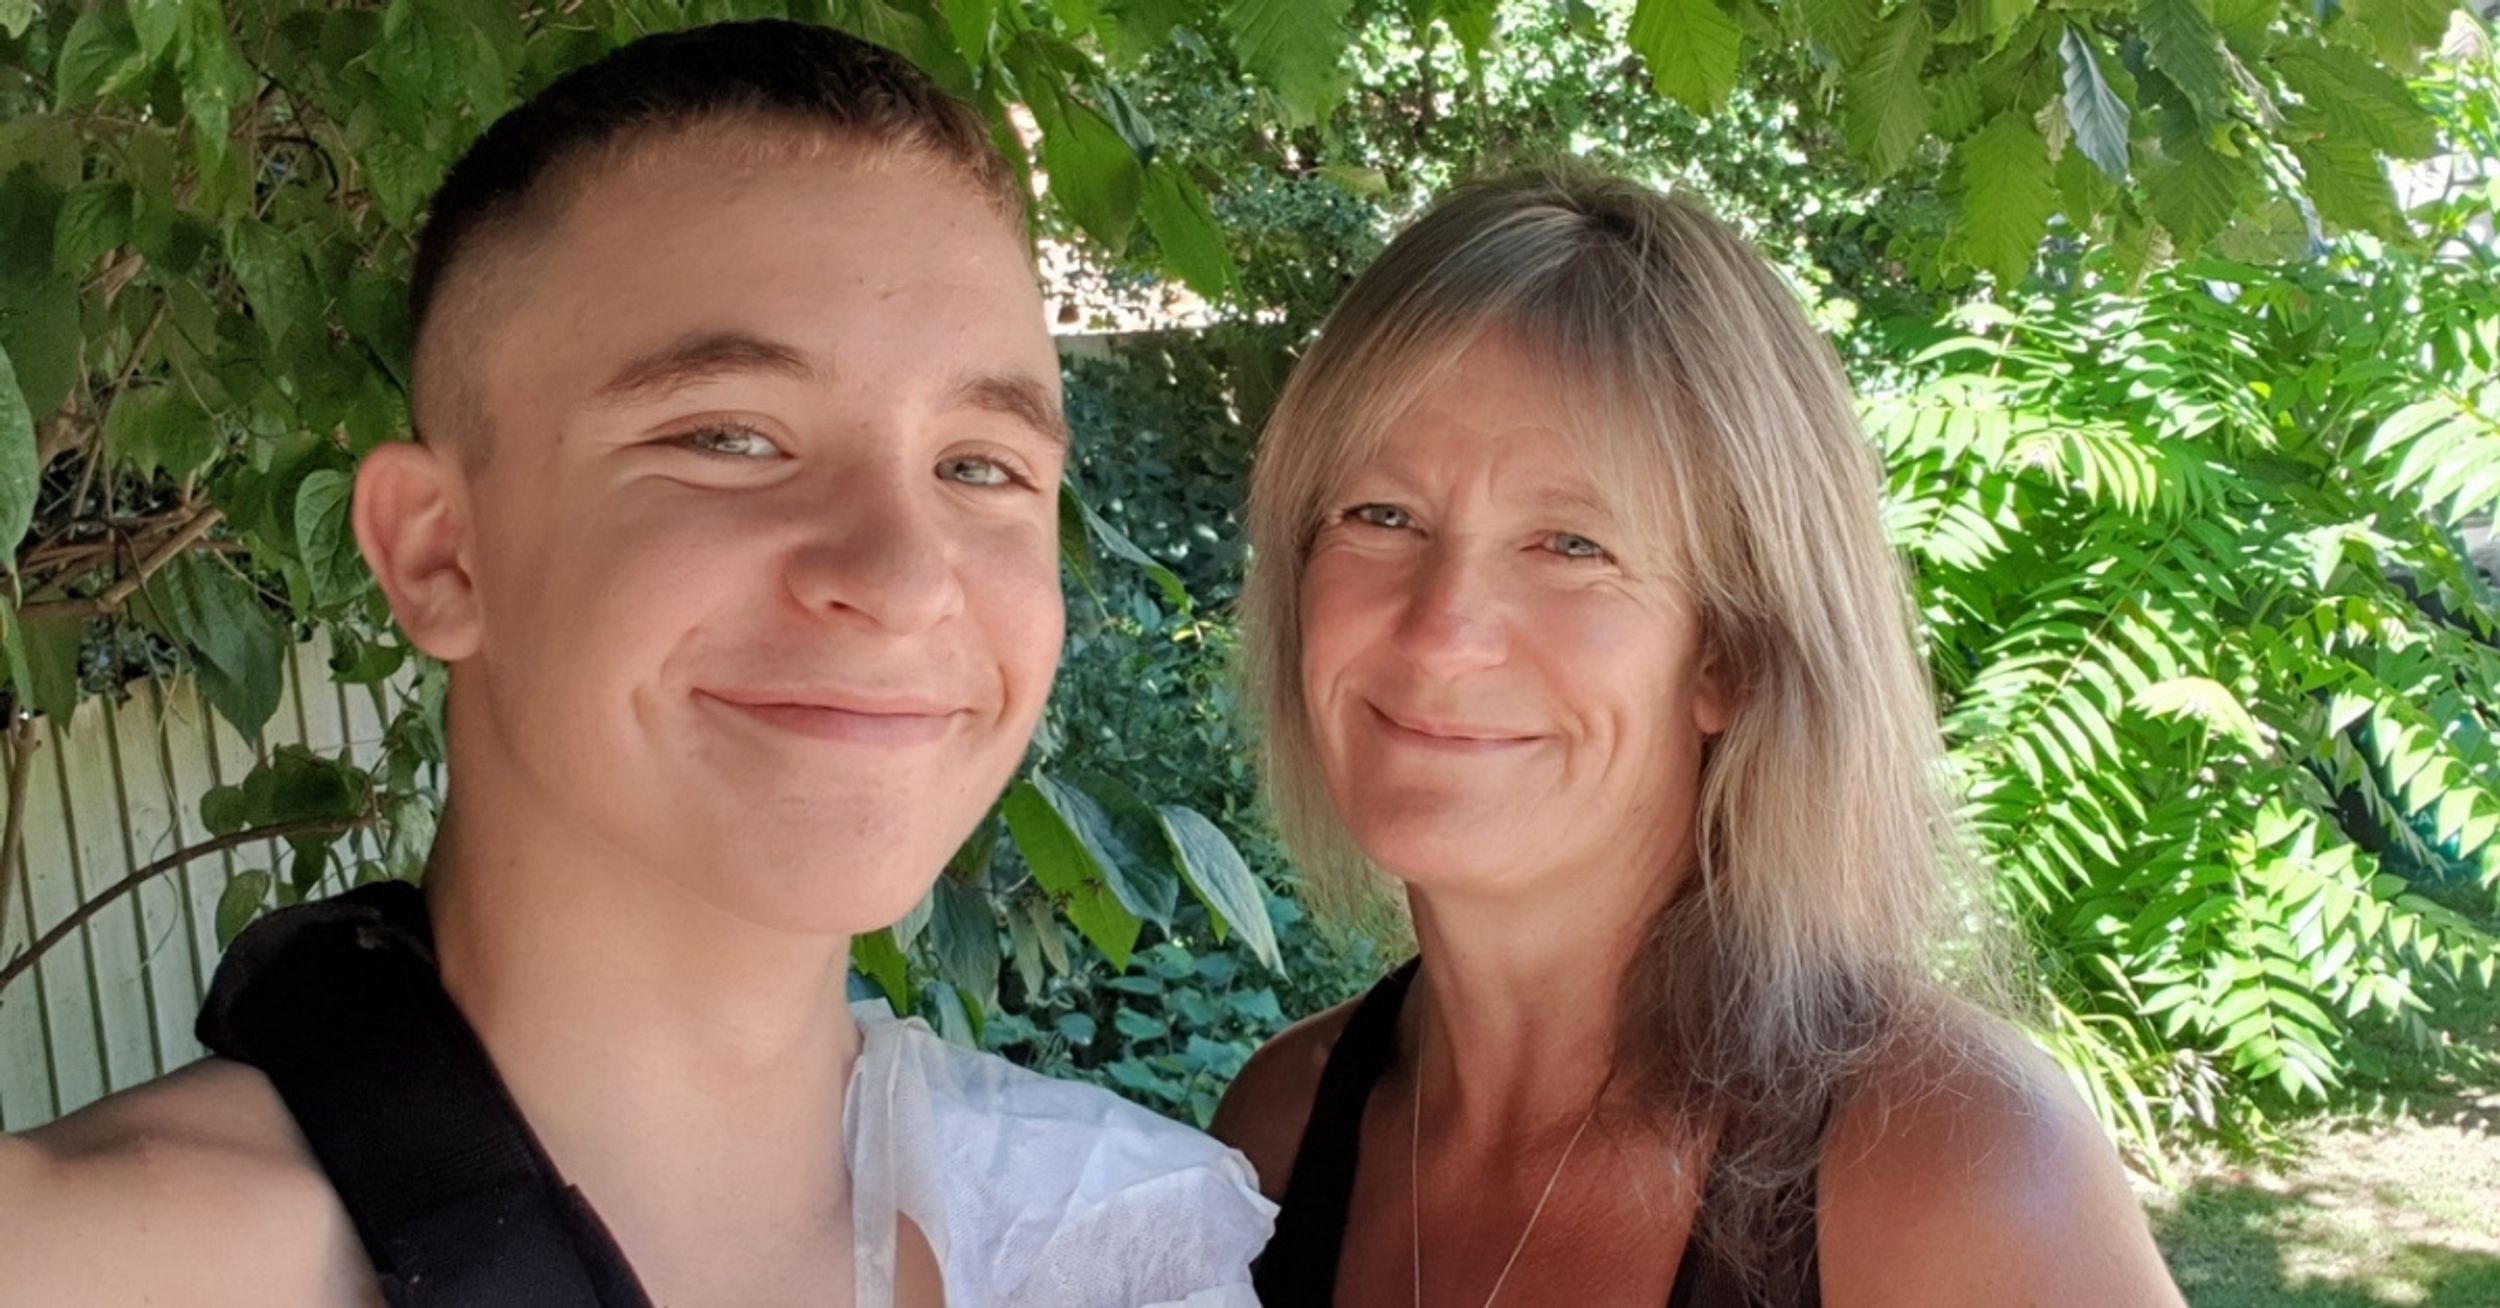 Mom Credits Mobile App For Helping Her Find Her Injured Son After He Crashed His Bike In The Middle Of A Forest